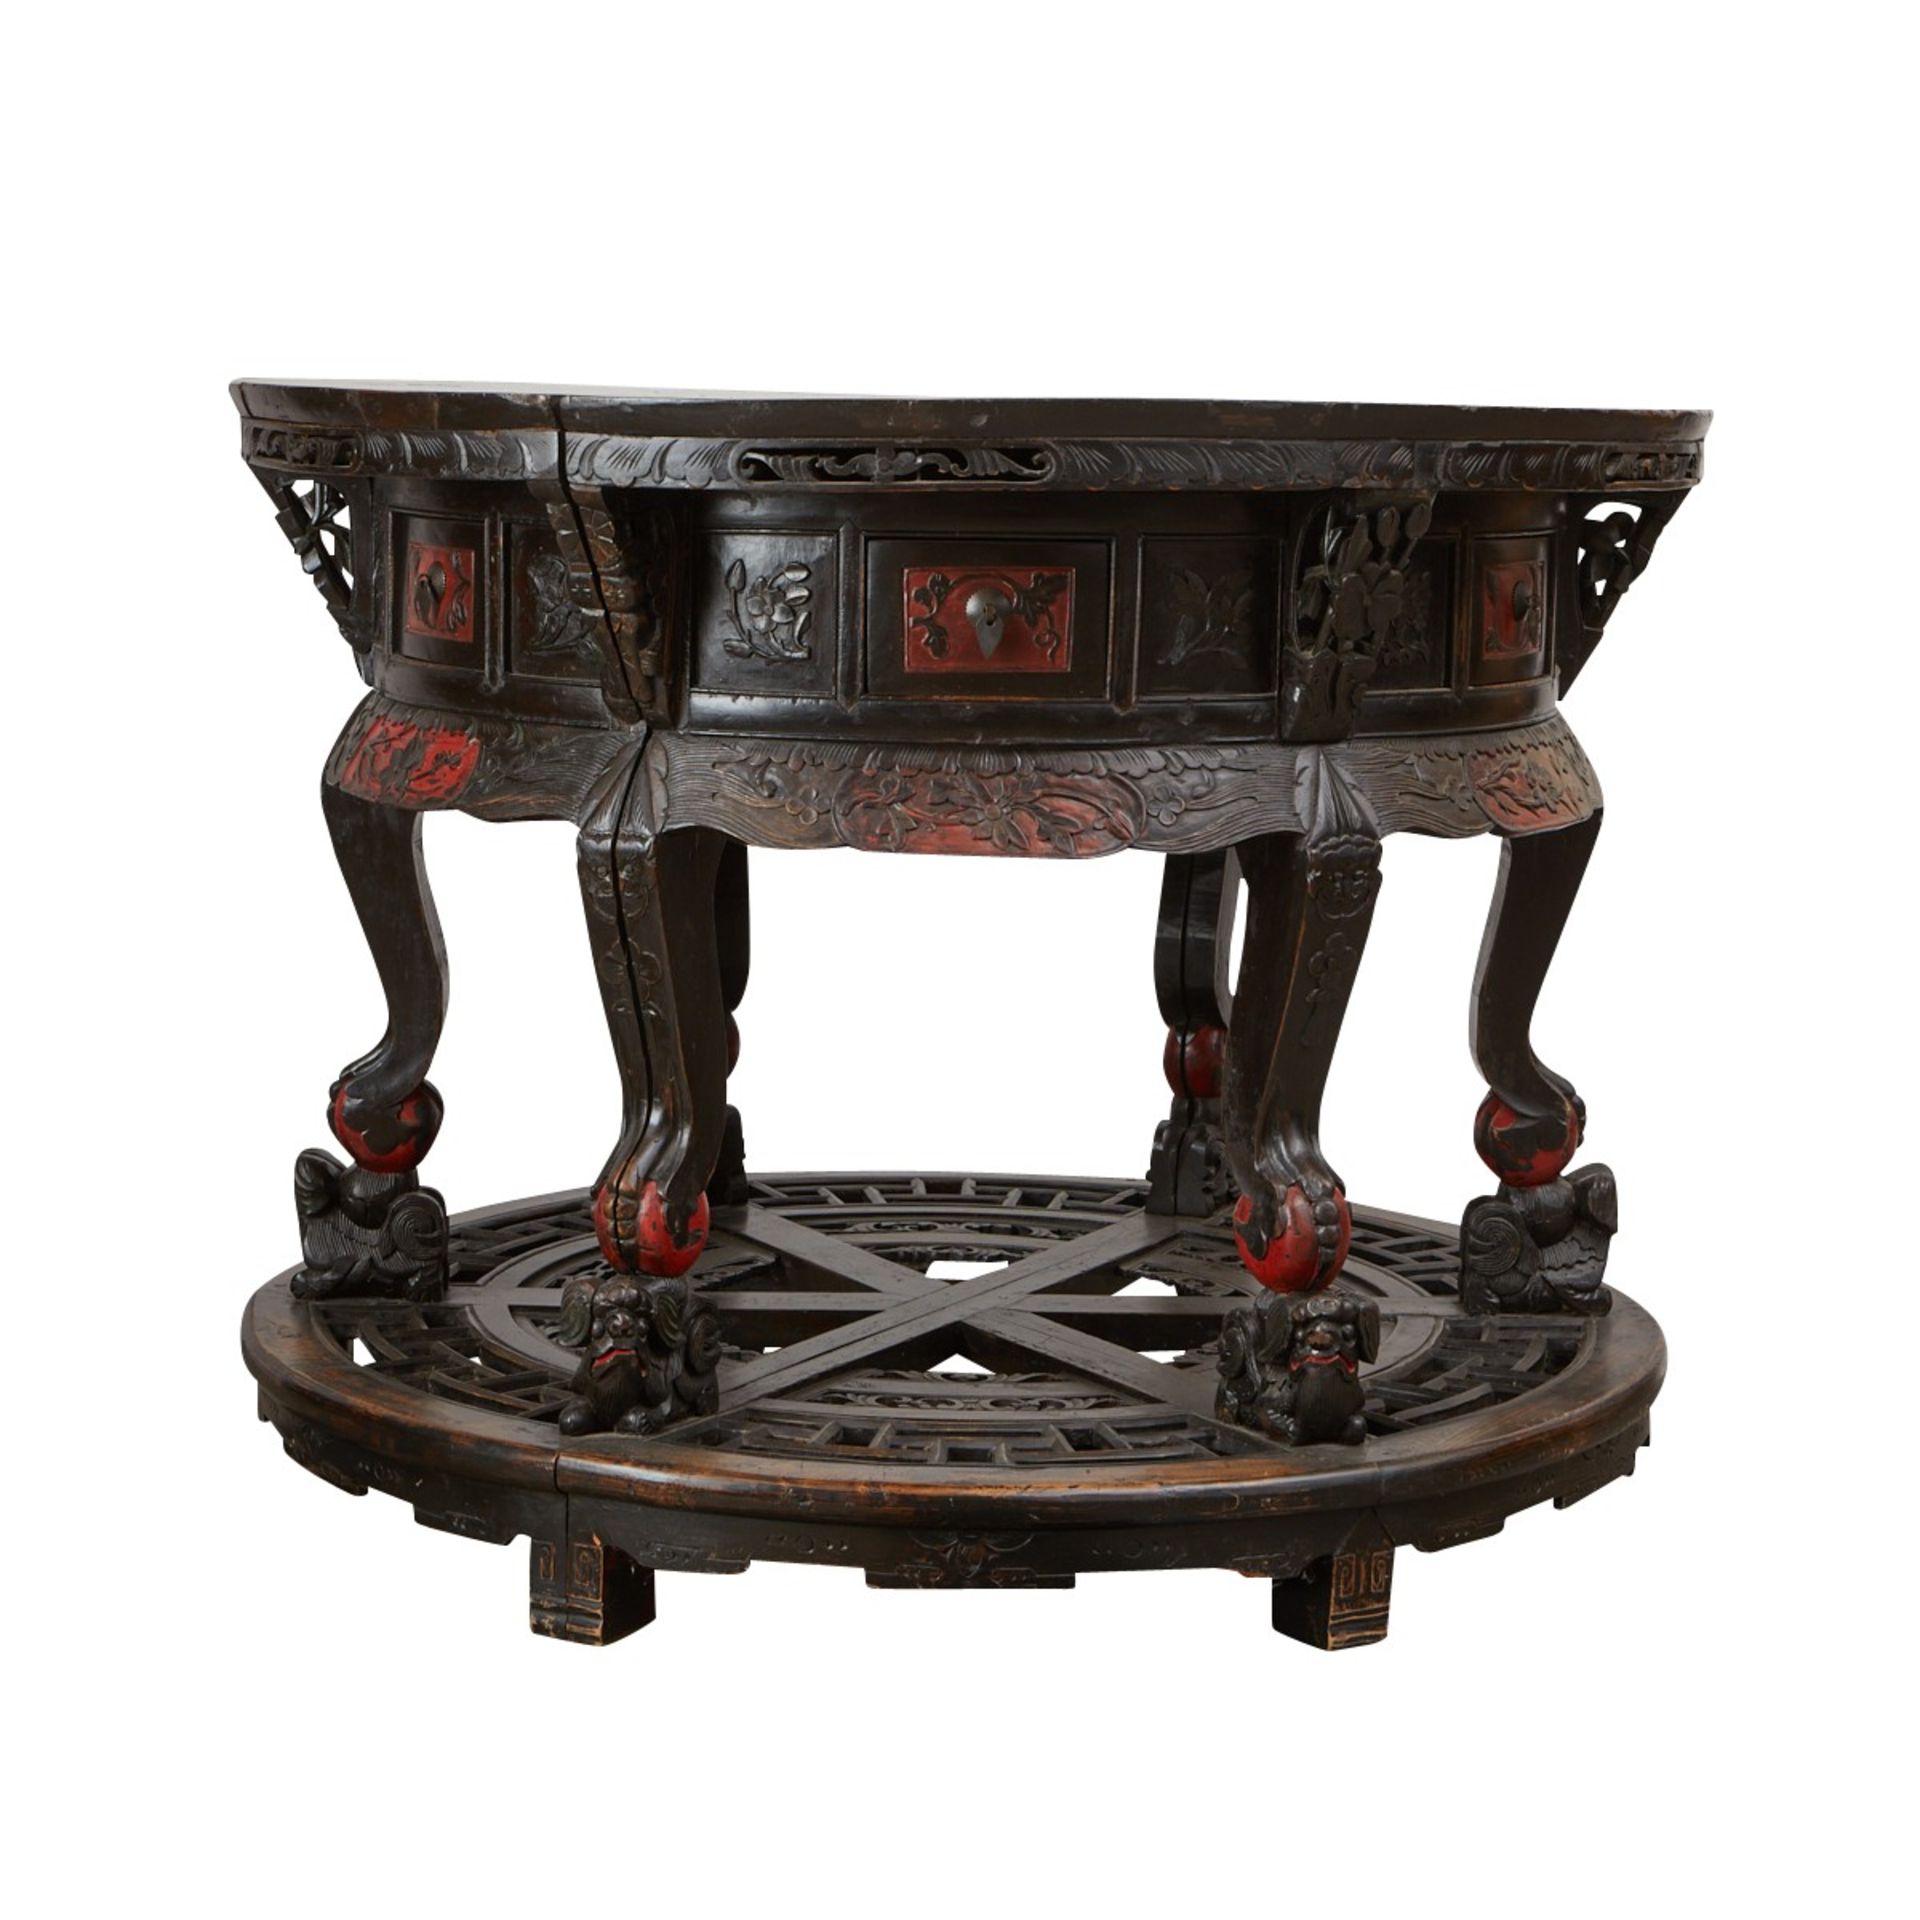 Chinese Round Carved Wood Table w/ Drawers 19th c. - Image 8 of 11